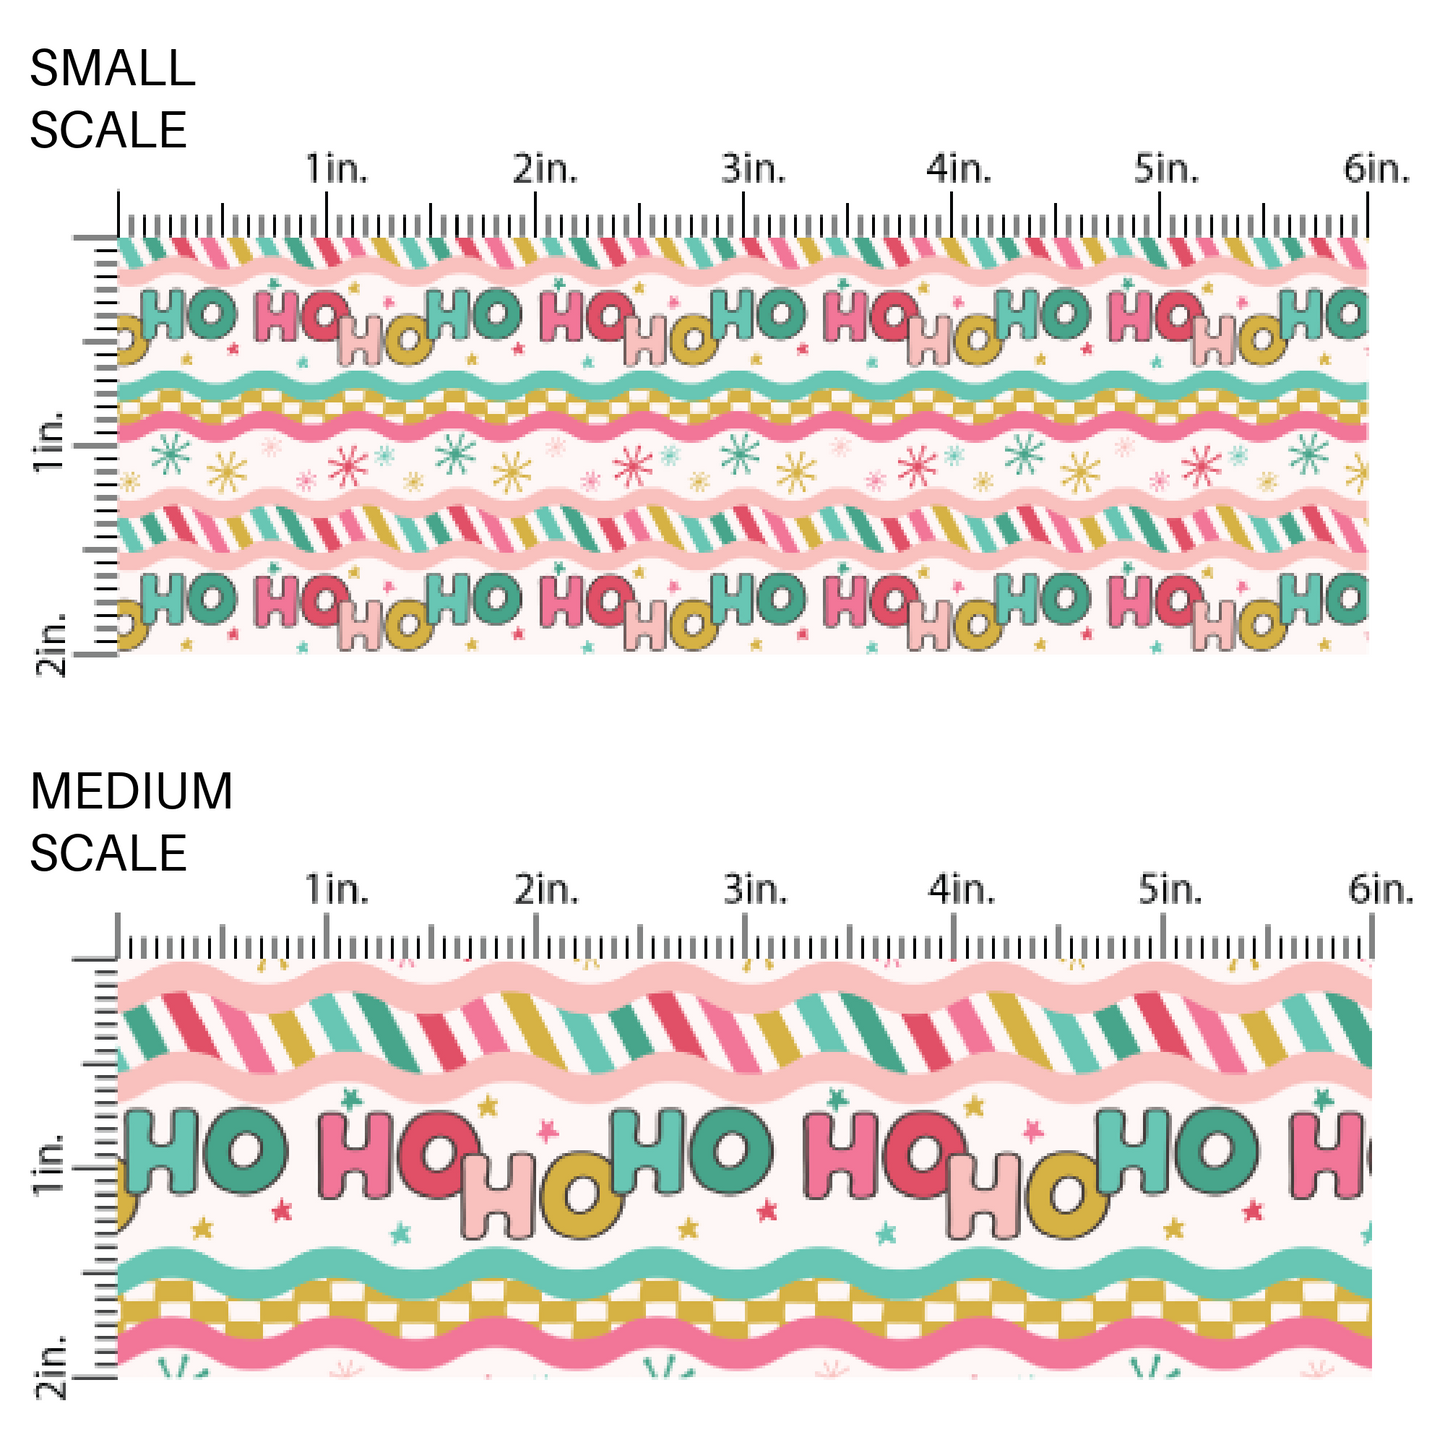 Fabric scaling guide 